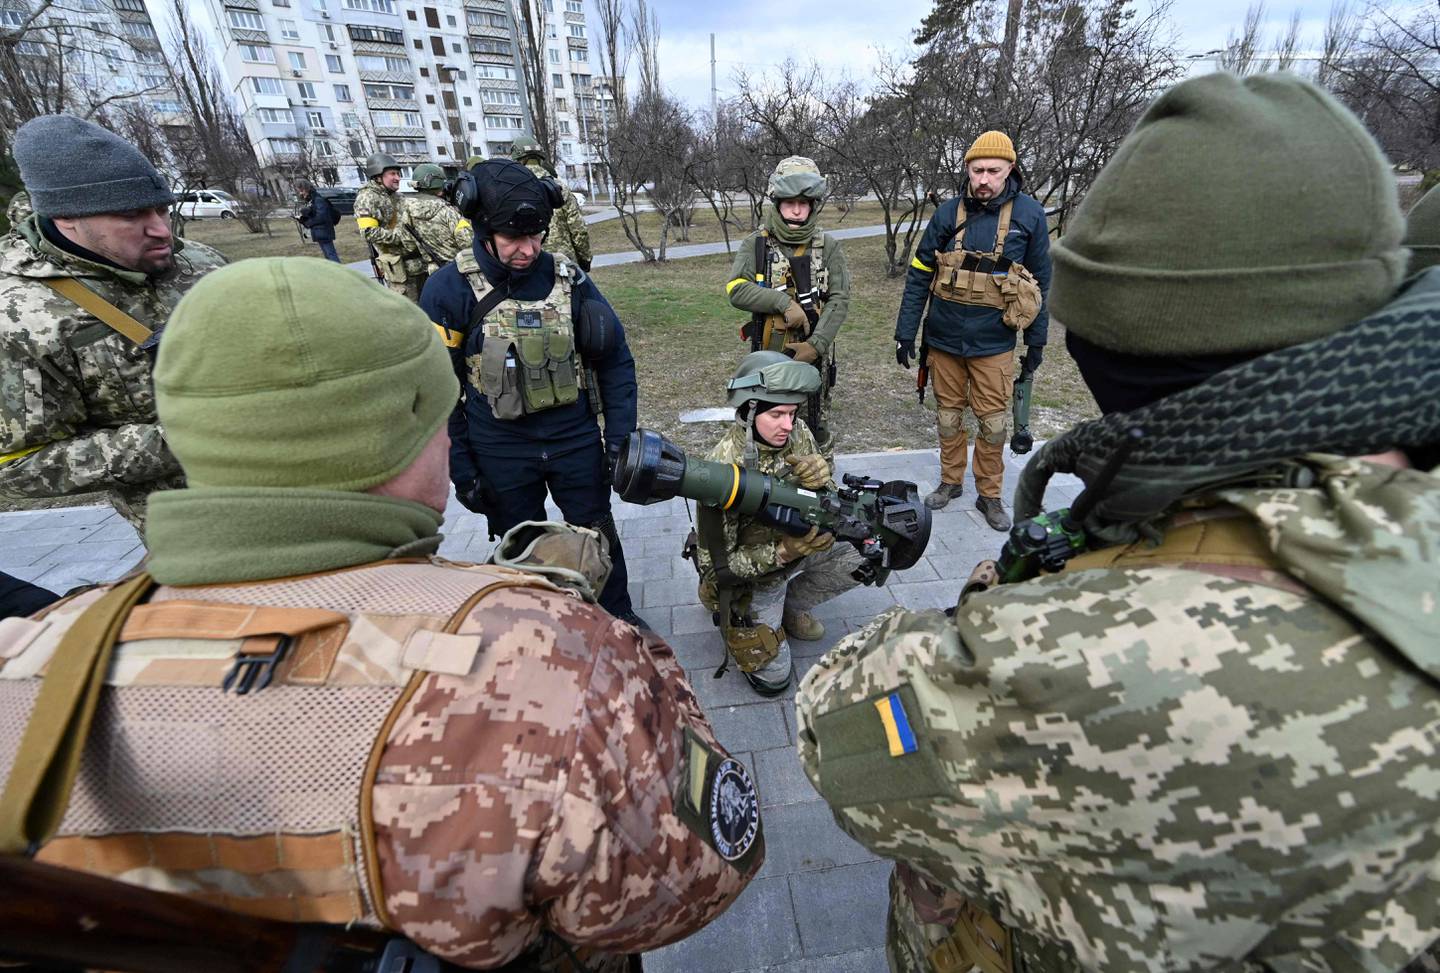 Members of the Ukrainian Territorial Defence Forces examine new weapons, including NLAW anti-tank systems, in Kyiv. AFP